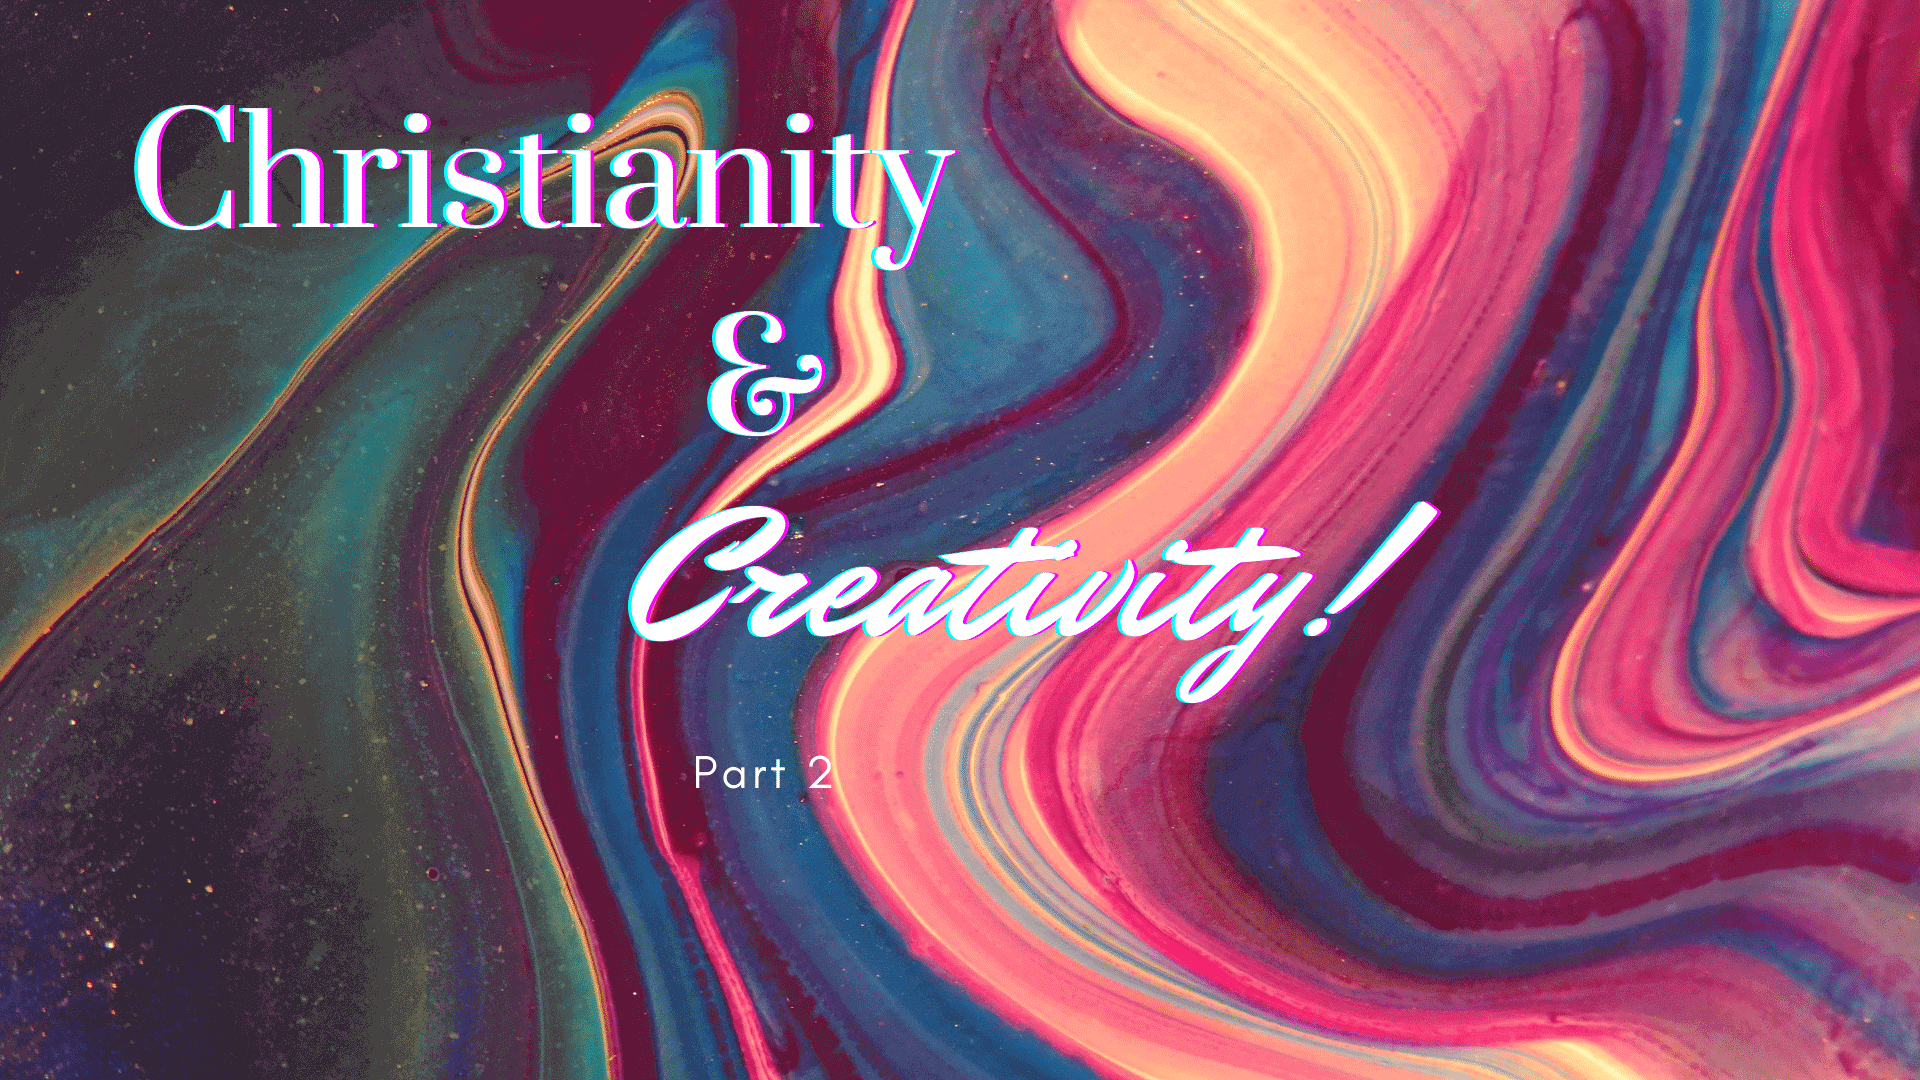 Artistic background with the words "Christianity and Creativity" on top